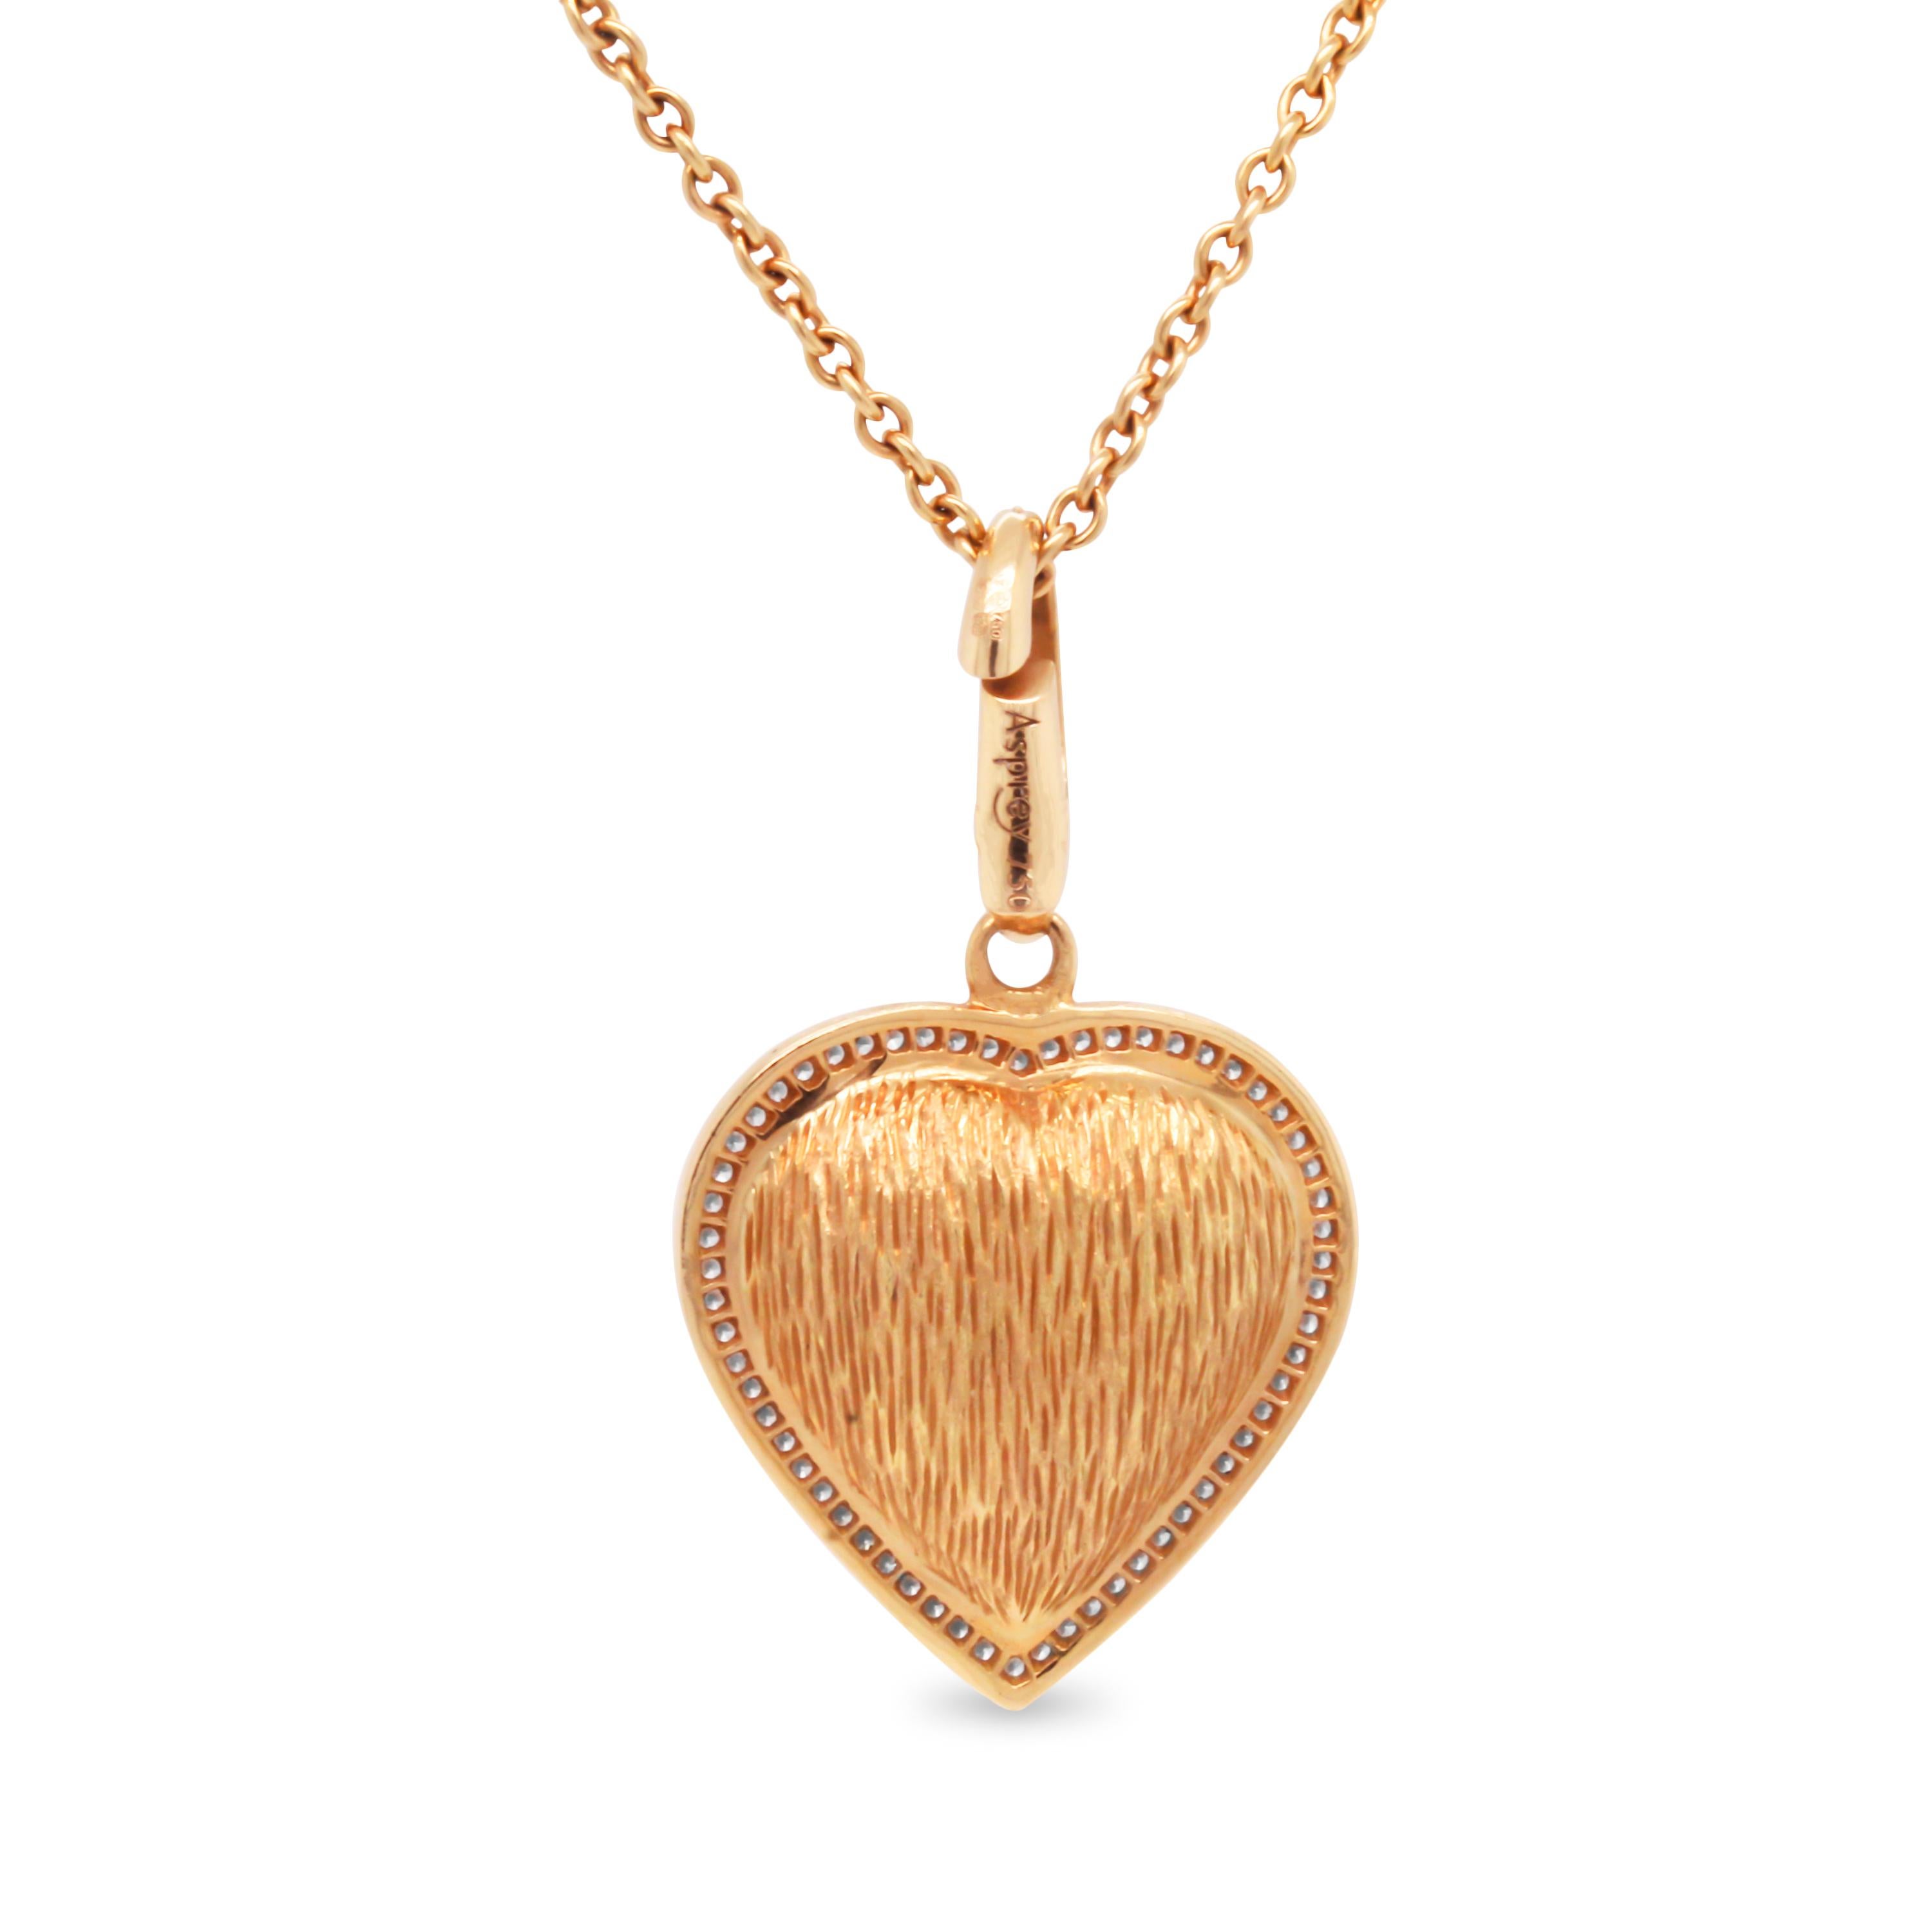 Asprey London 18K Yellow Gold and Diamond Heart Enhancer Pendant with Chain

This brushed-matte finished heart pendant has diamonds set on the edge. 

Apprx. 0.76 carat G color, VS clarity diamonds total weight

Chain is 22 inches in length.

Heart